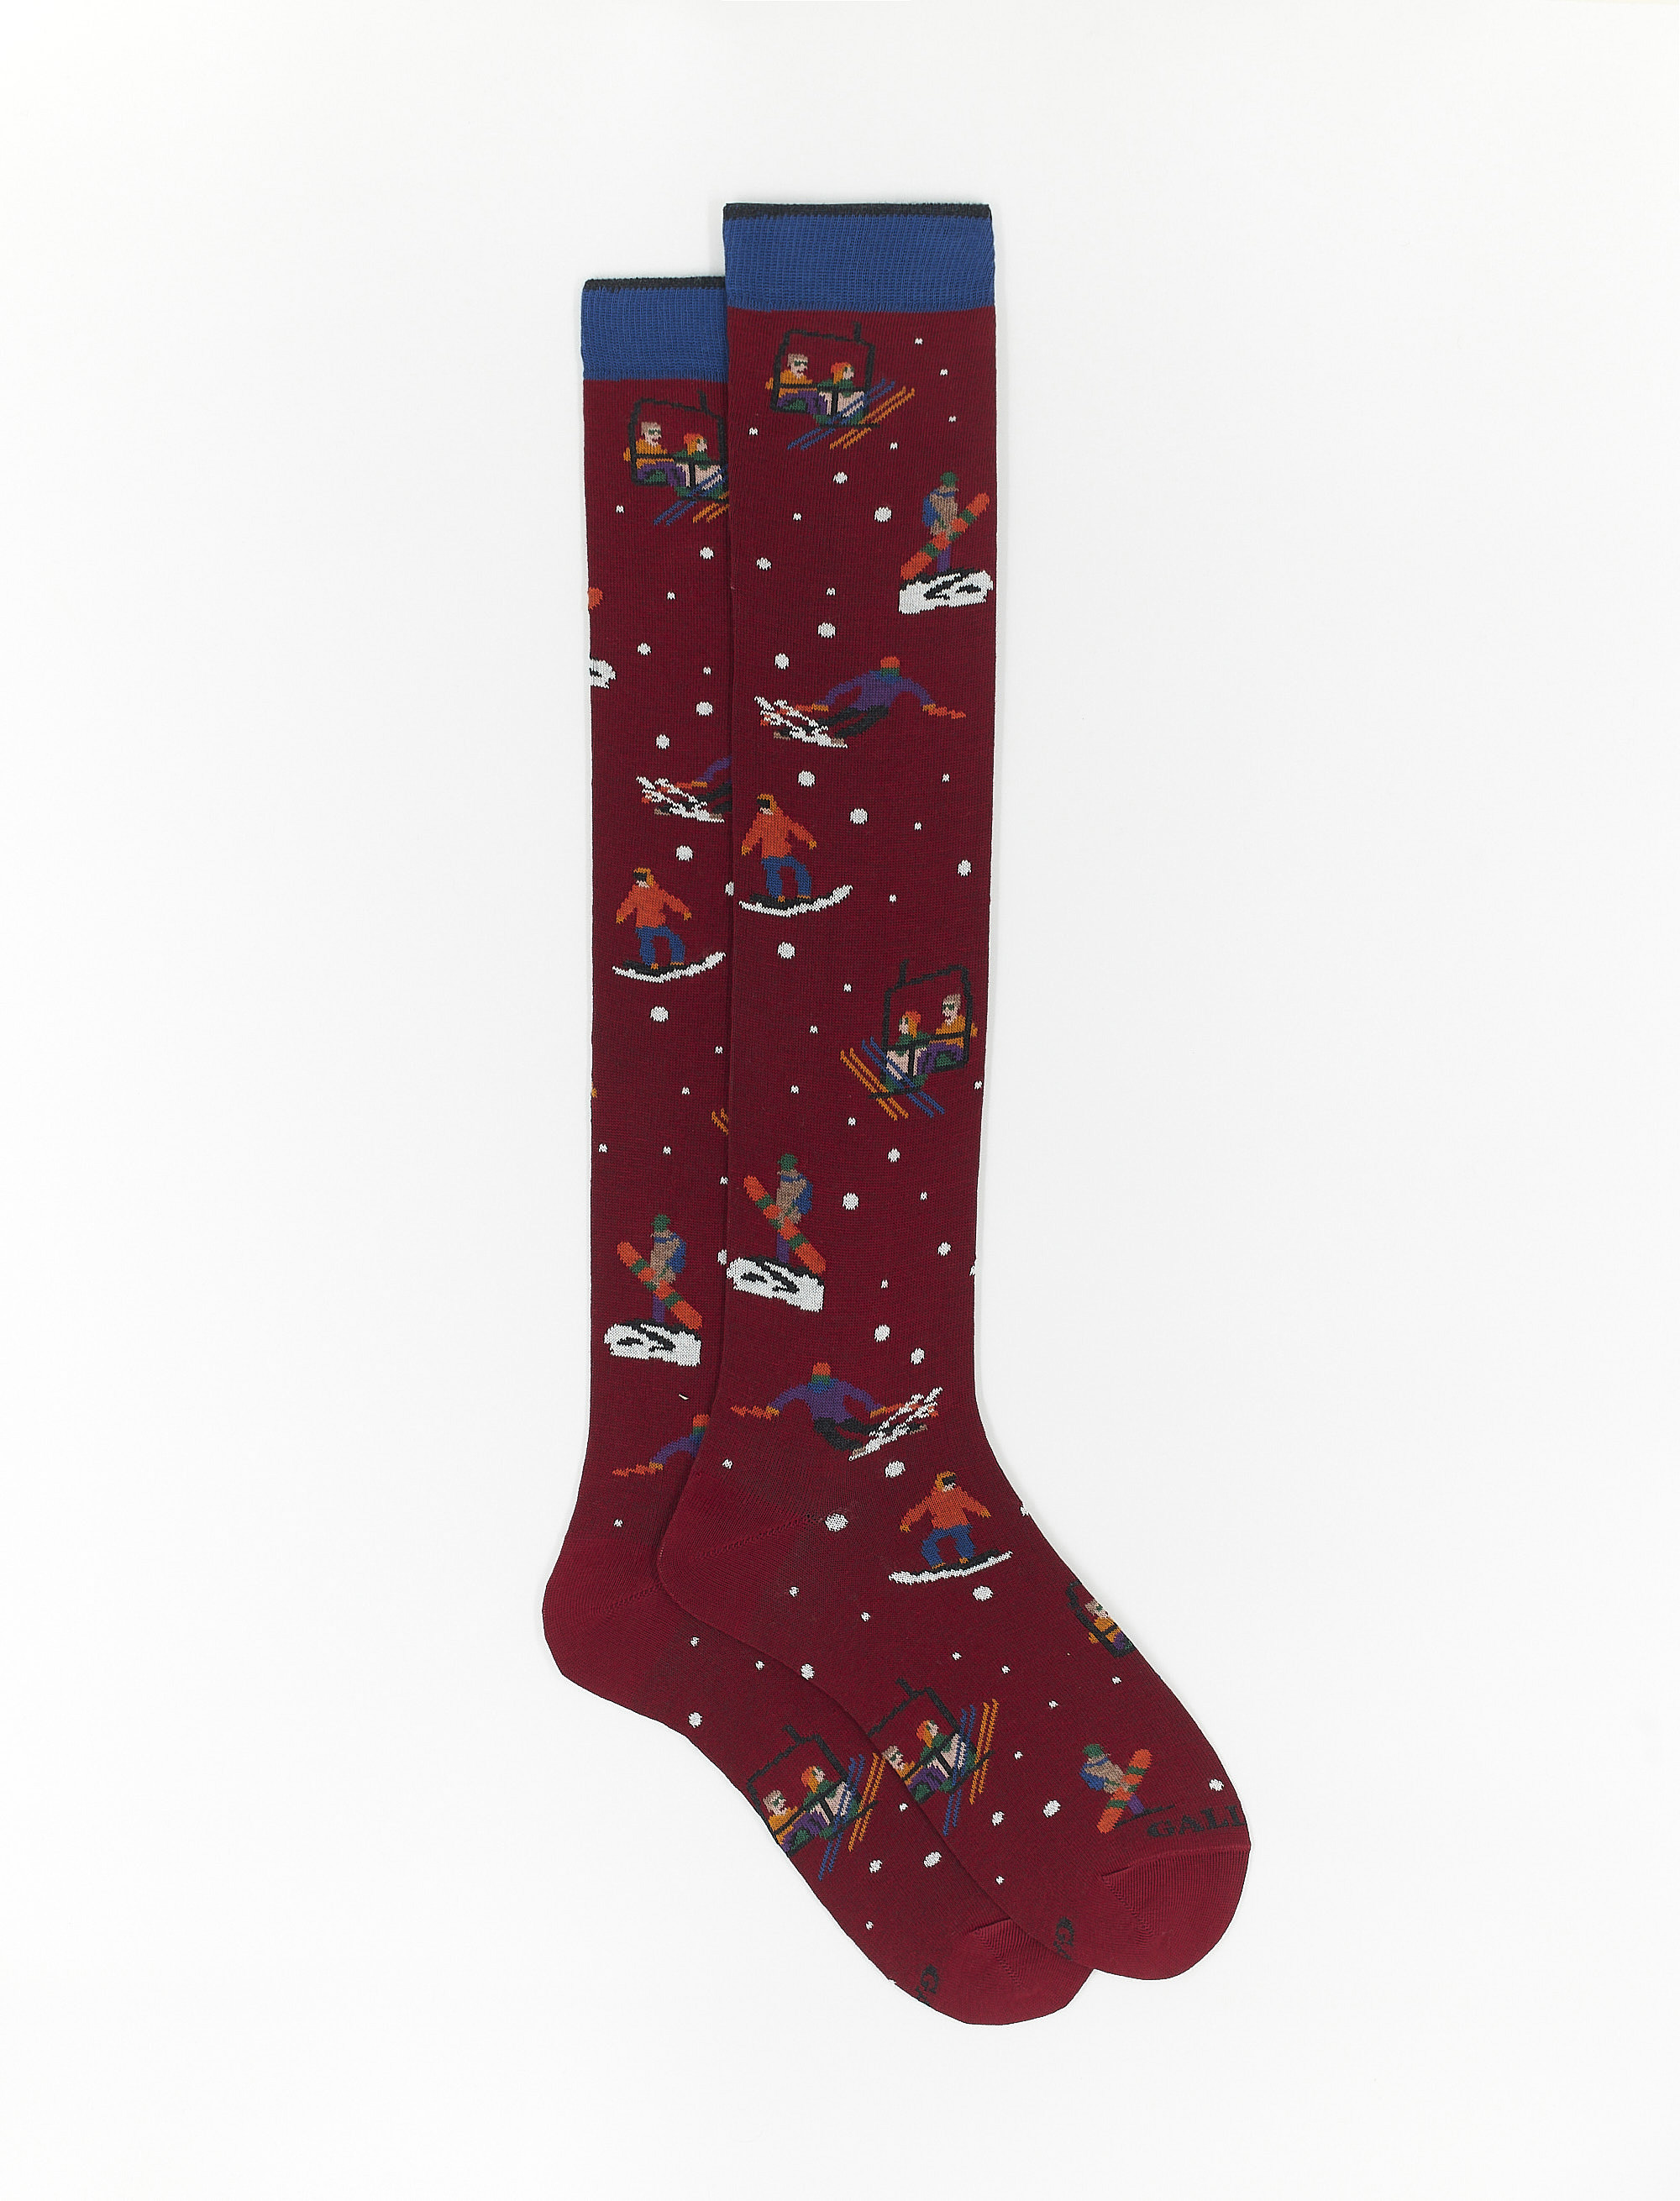 Women's long amaranth cotton socks with skier motif - The FW Edition | Gallo 1927 - Official Online Shop